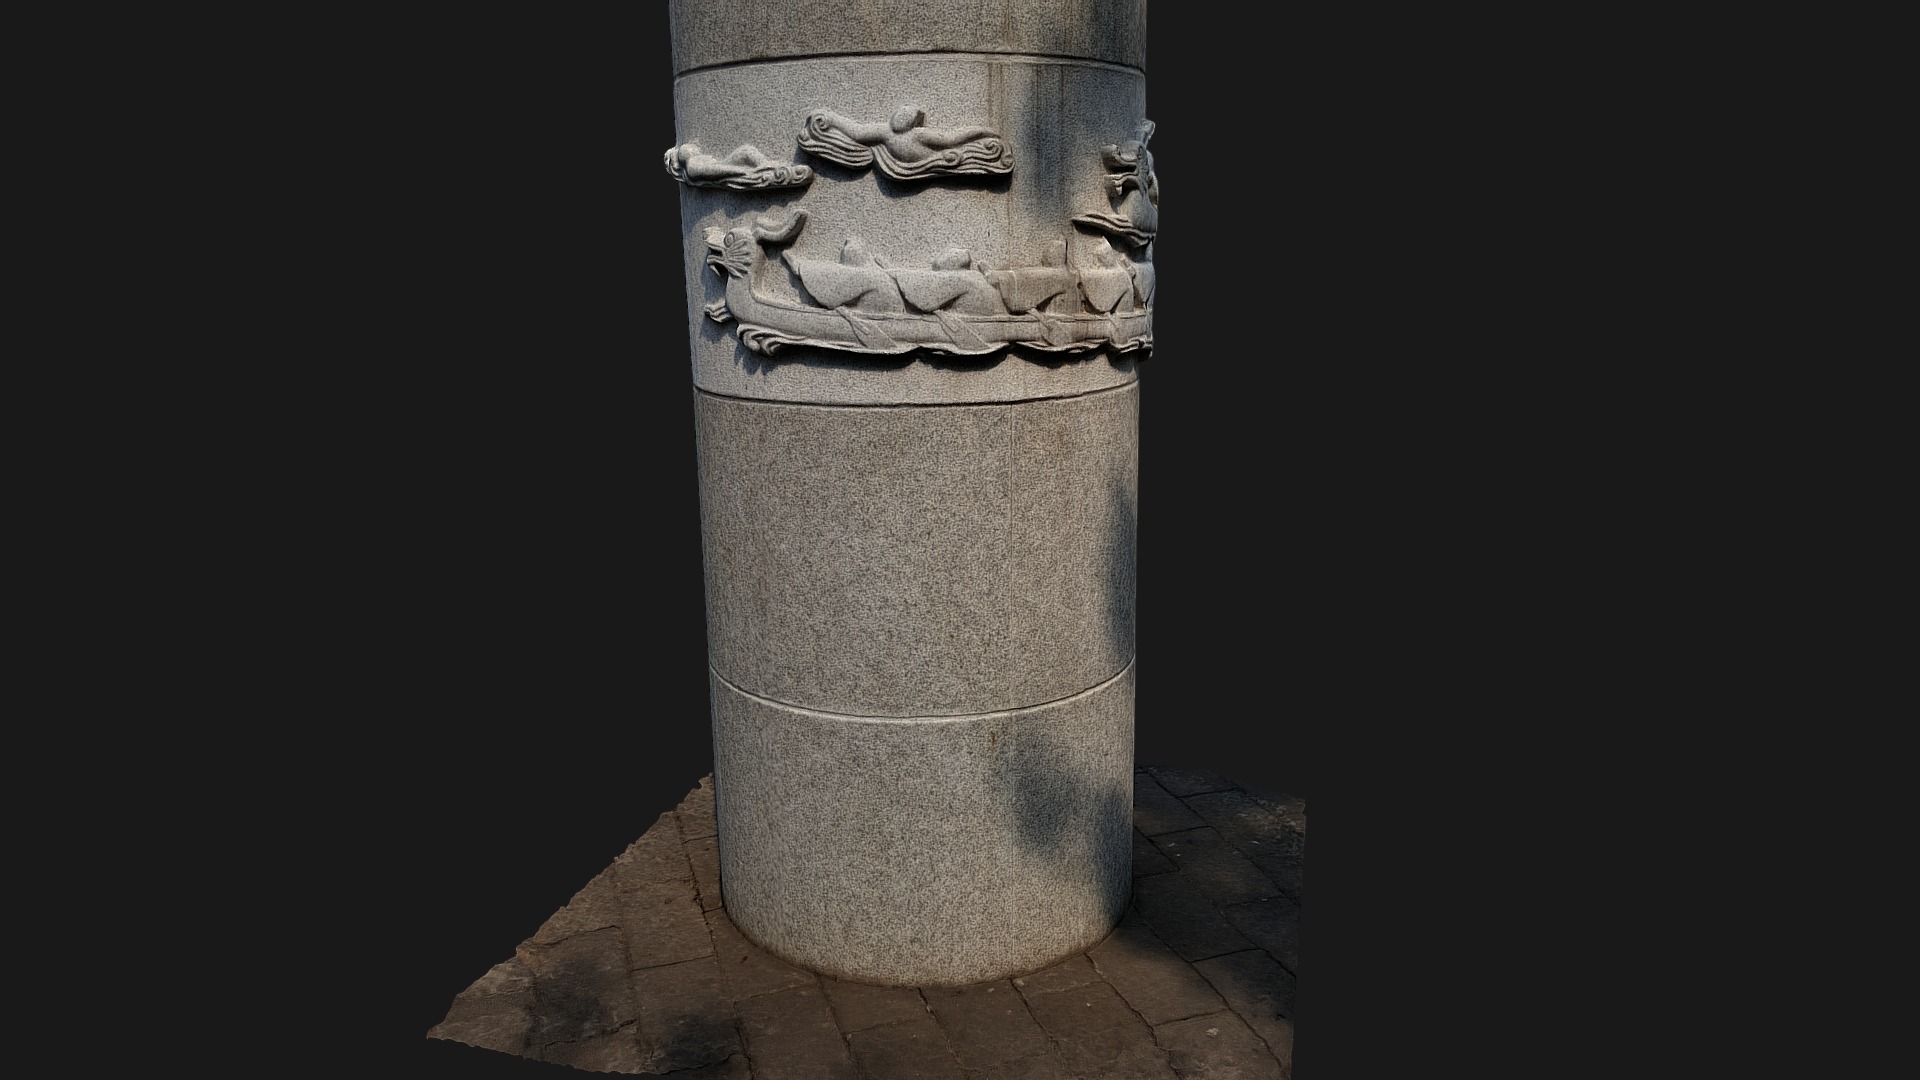 3D model 2016-09 – Beijing 10 - This is a 3D model of the 2016-09 - Beijing 10. The 3D model is about a stone pillar with a carved face.